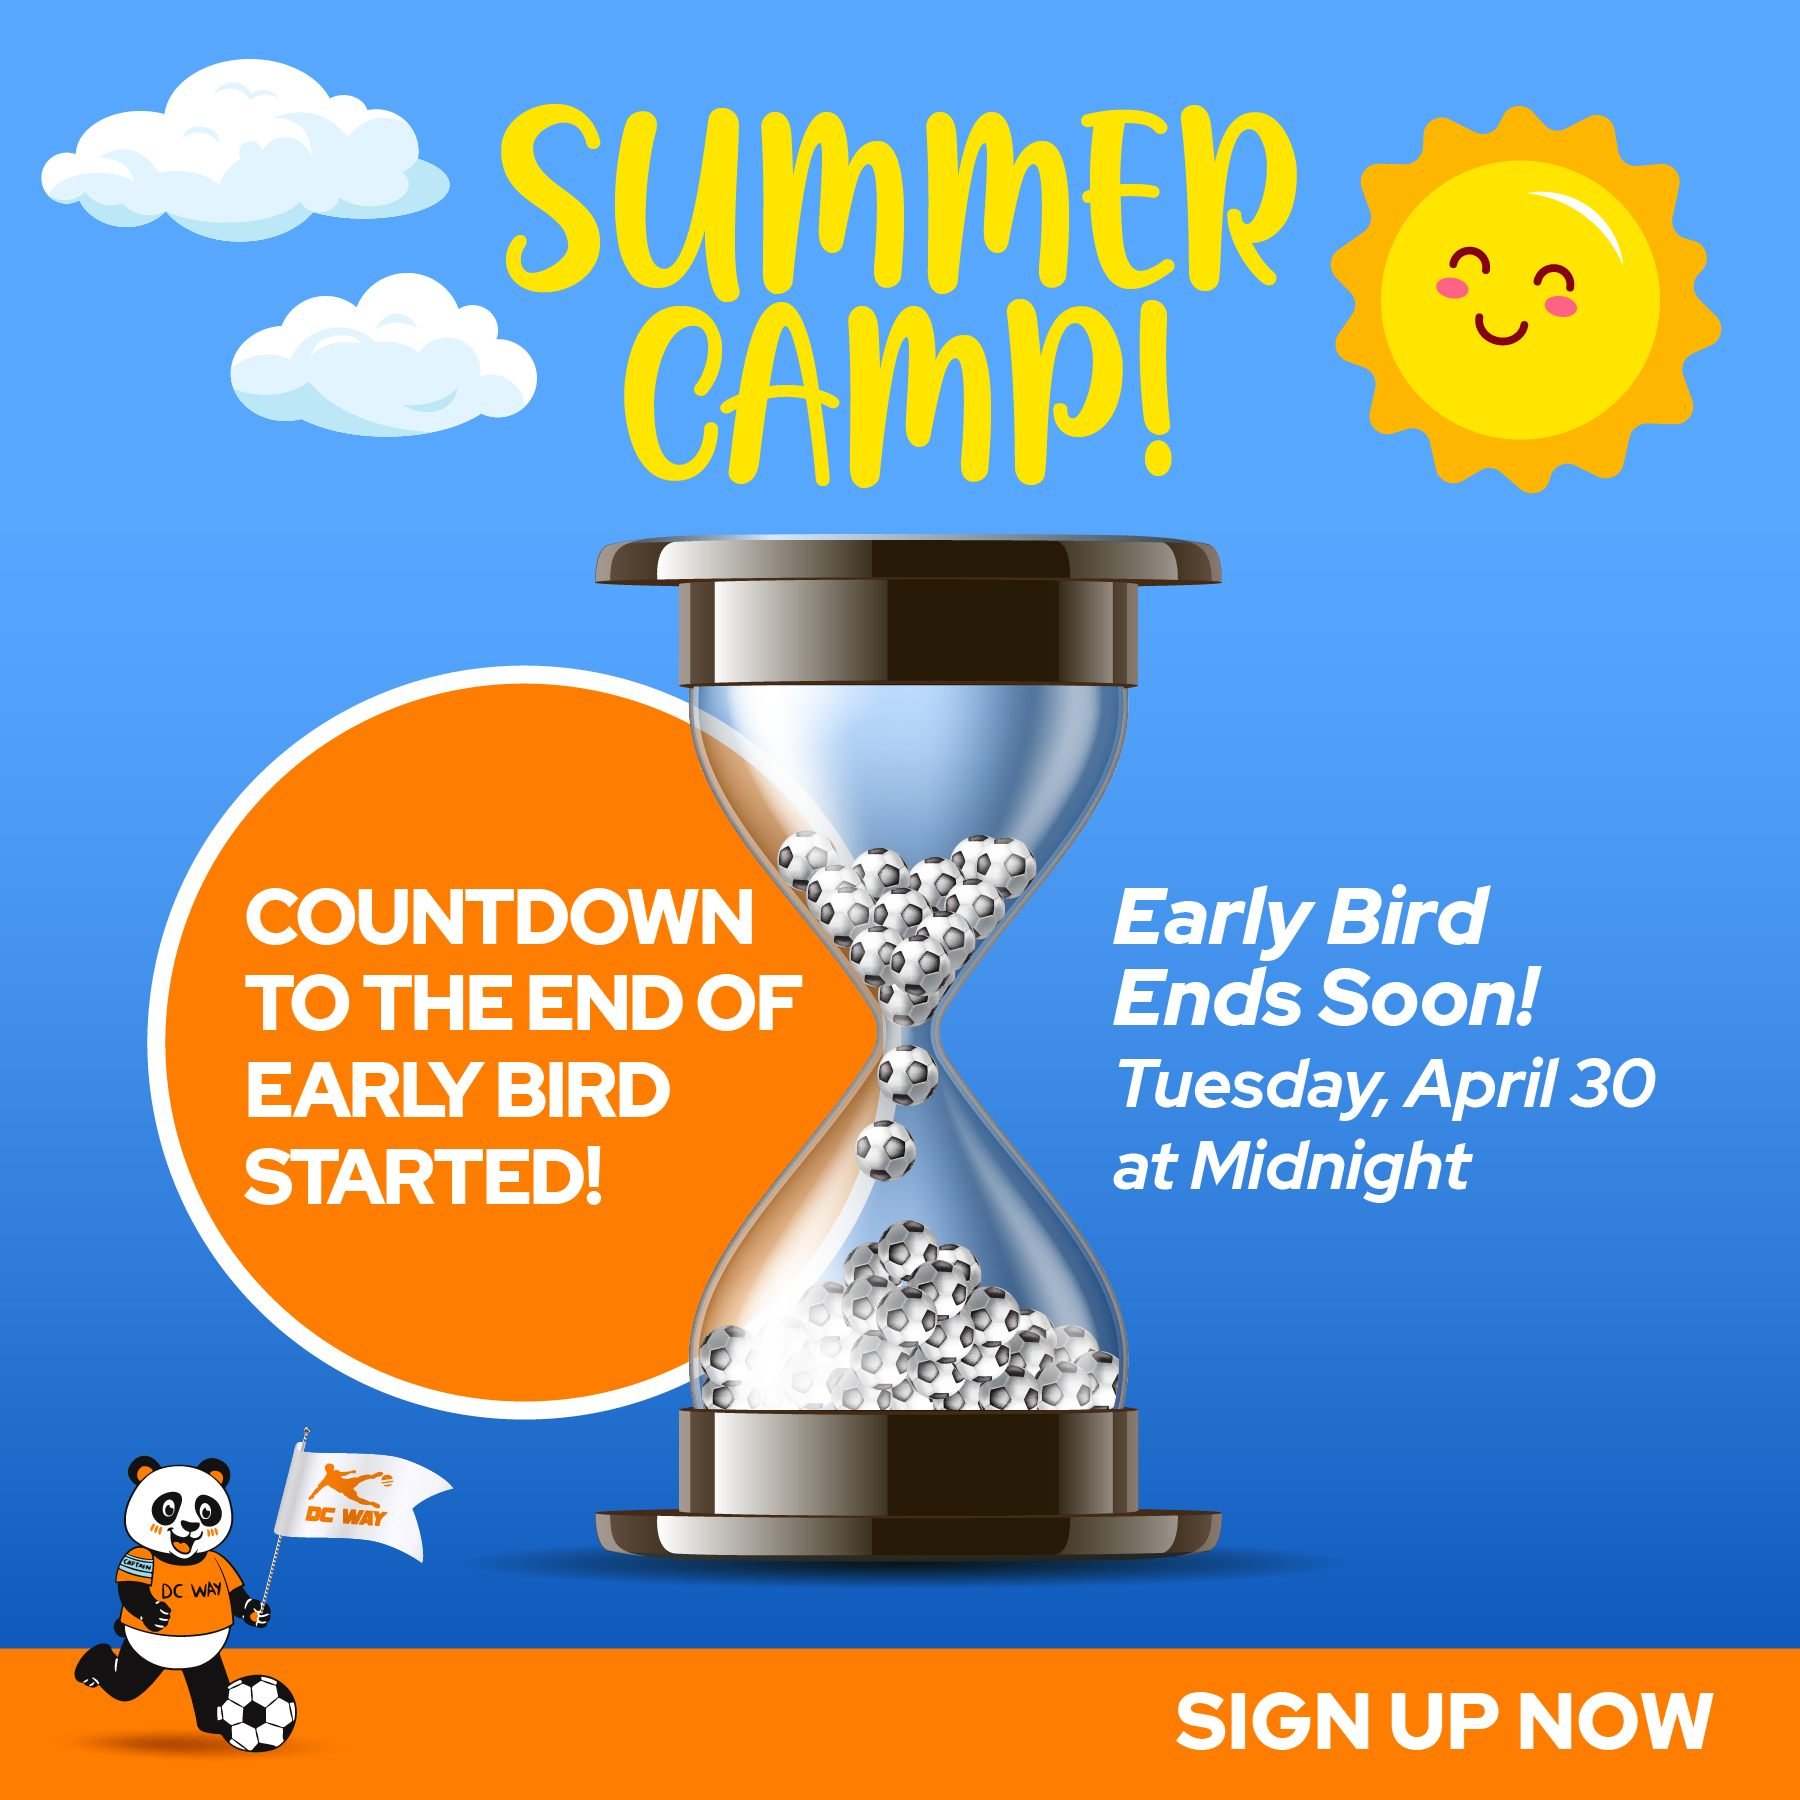 📢 Attention parents! Only 3 days left to seize the savings... 🐦 Our Summer Camp Early Bird Special is ending on Tuesday! ⚽️
 
Hurry and sign up now to secure your child's spot.🌟

Link in bio.

#DCWay #Soccer #Summer #Camp #EarlyBird #CountdownIsOn